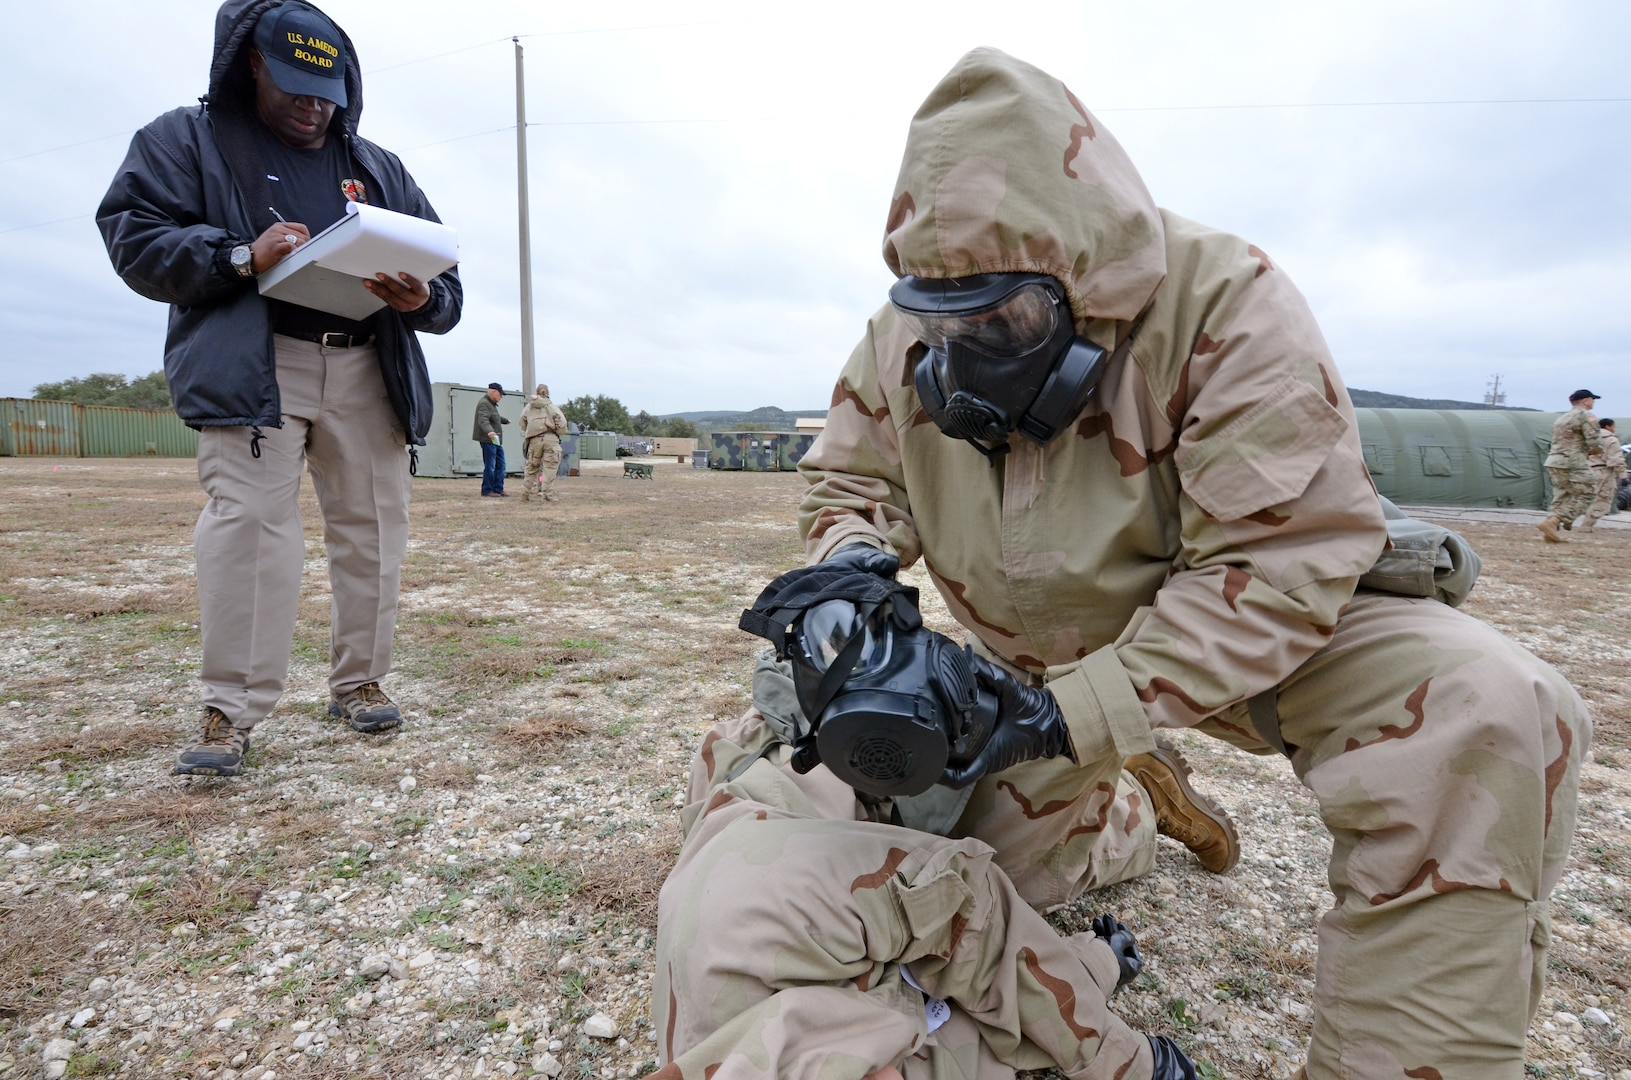 U.S. Army Medical Department Board test evaluator Eddie Fields writes down his observations during a similar auto-injector test performed earlier in 2019 at Joint Base San Antonio-Camp Bullis.